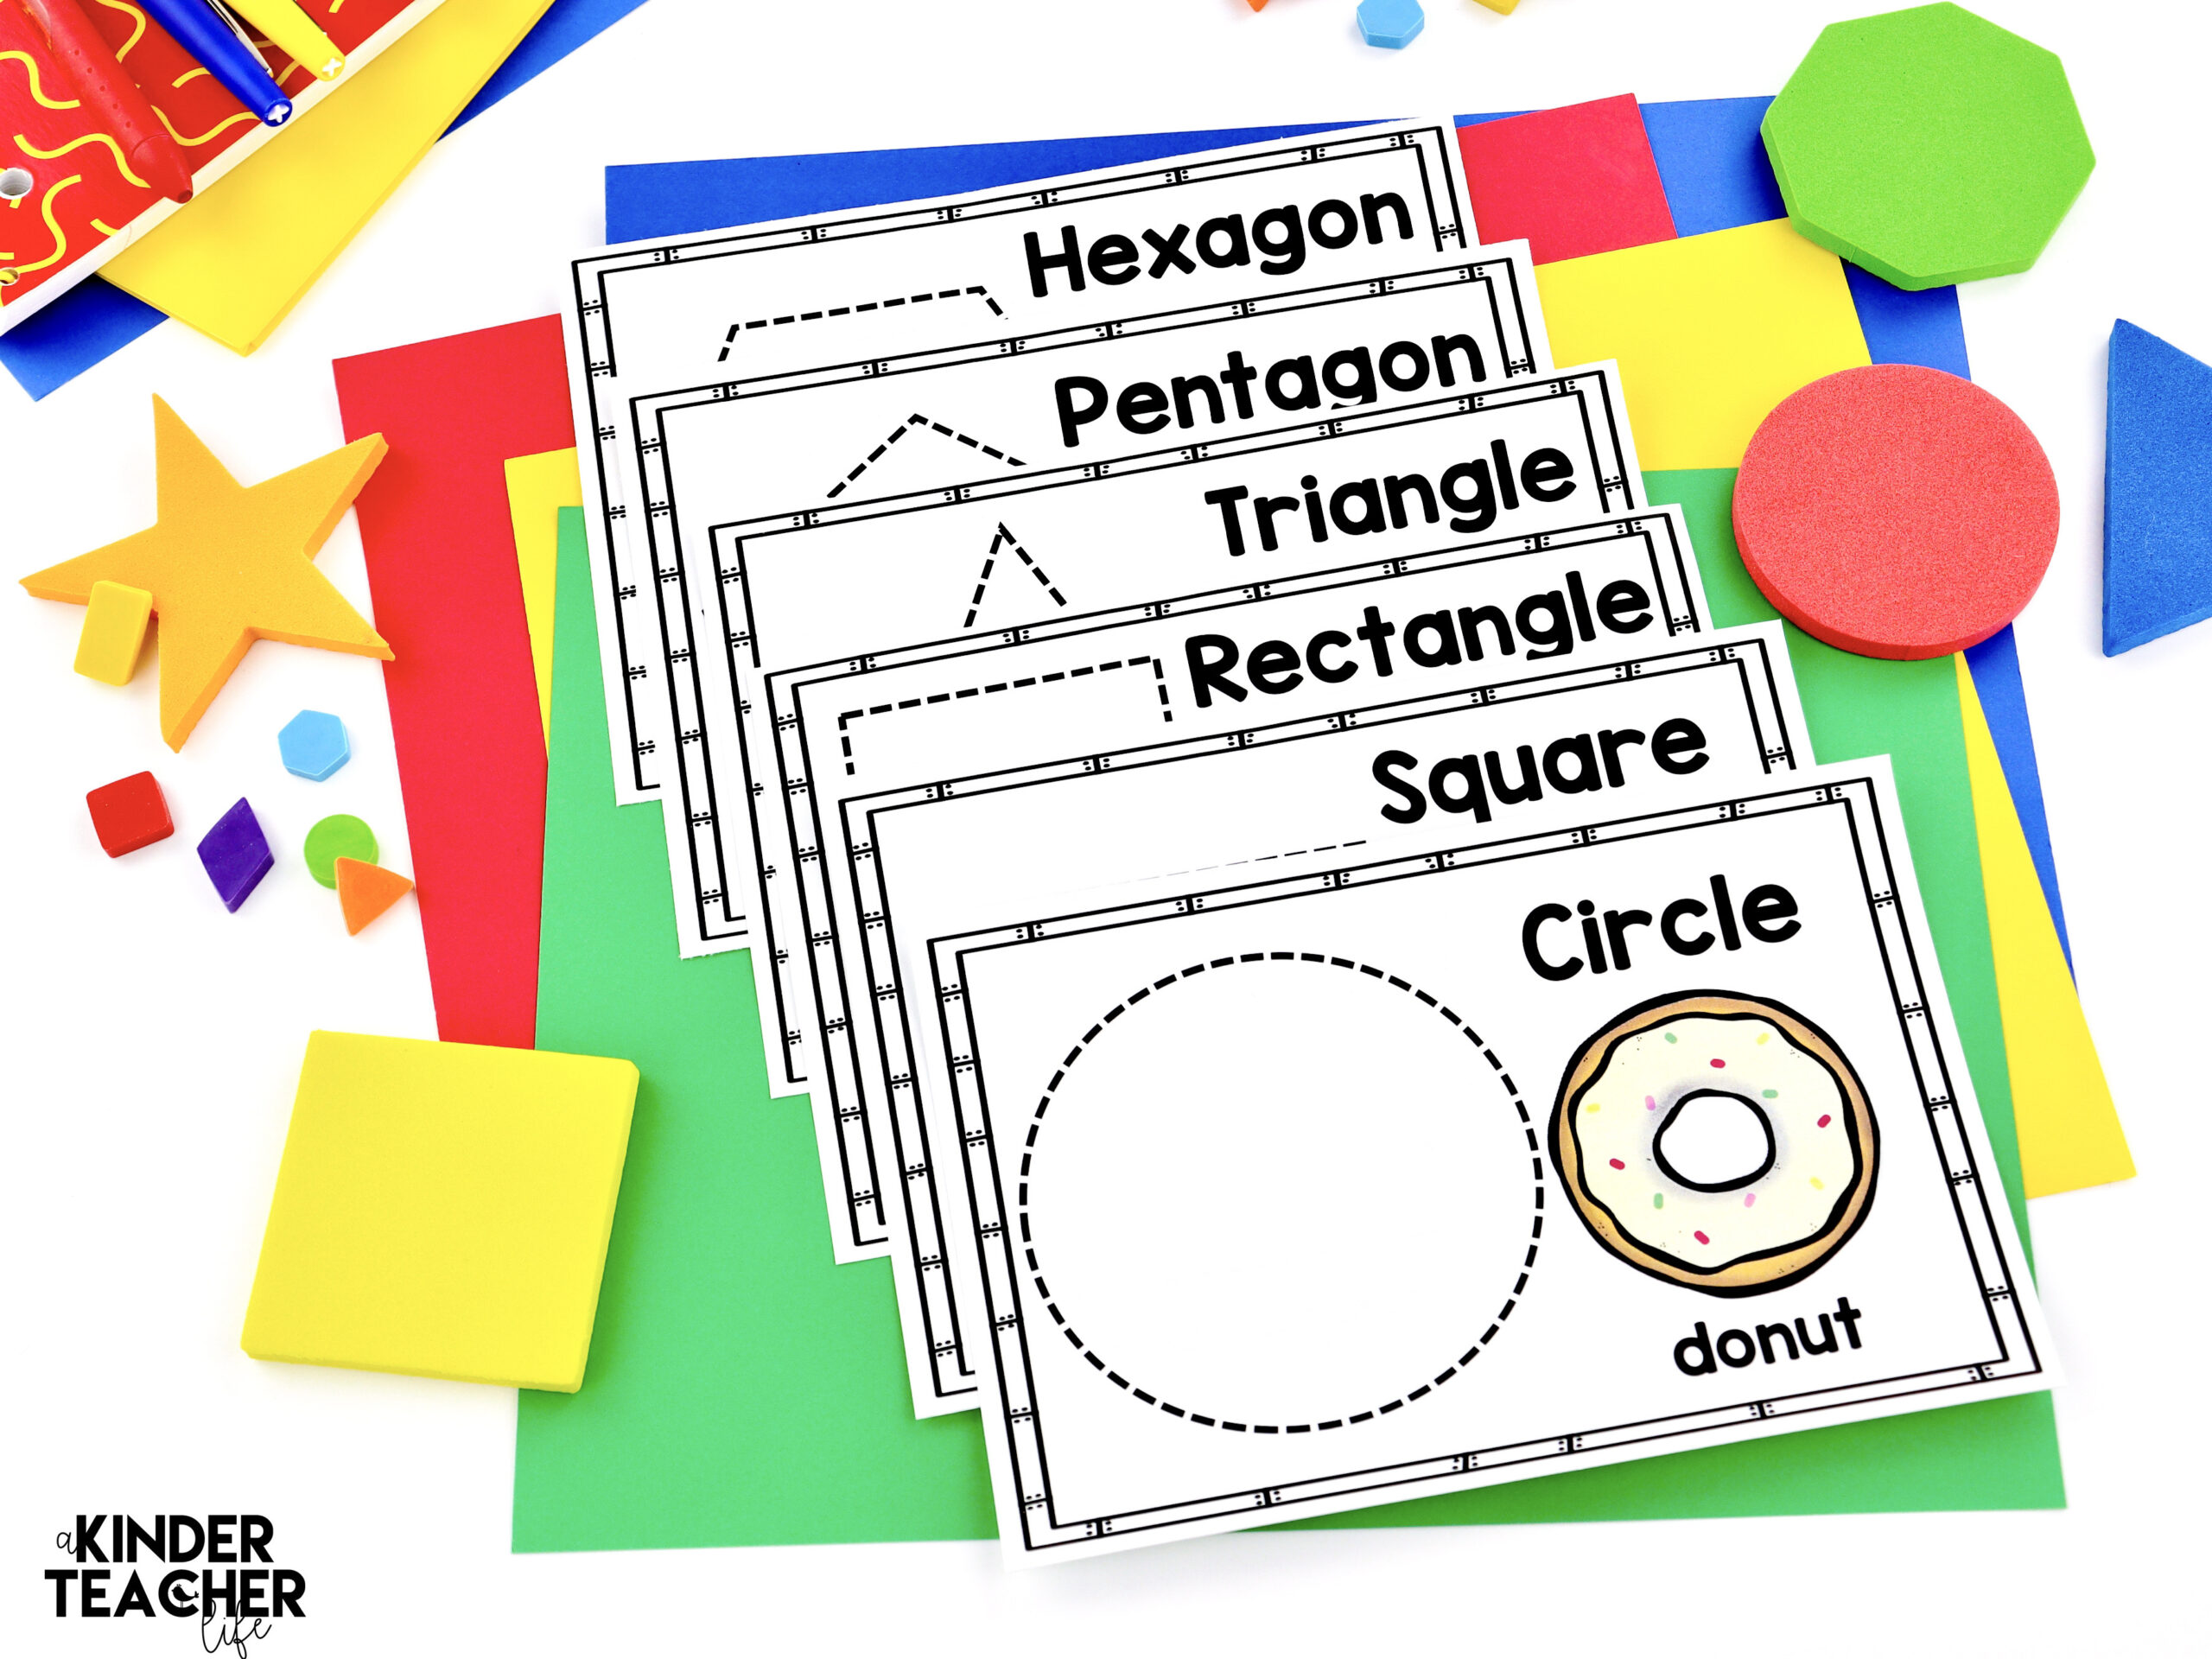 Fun Ways to Teach 2D and 3D Shapes